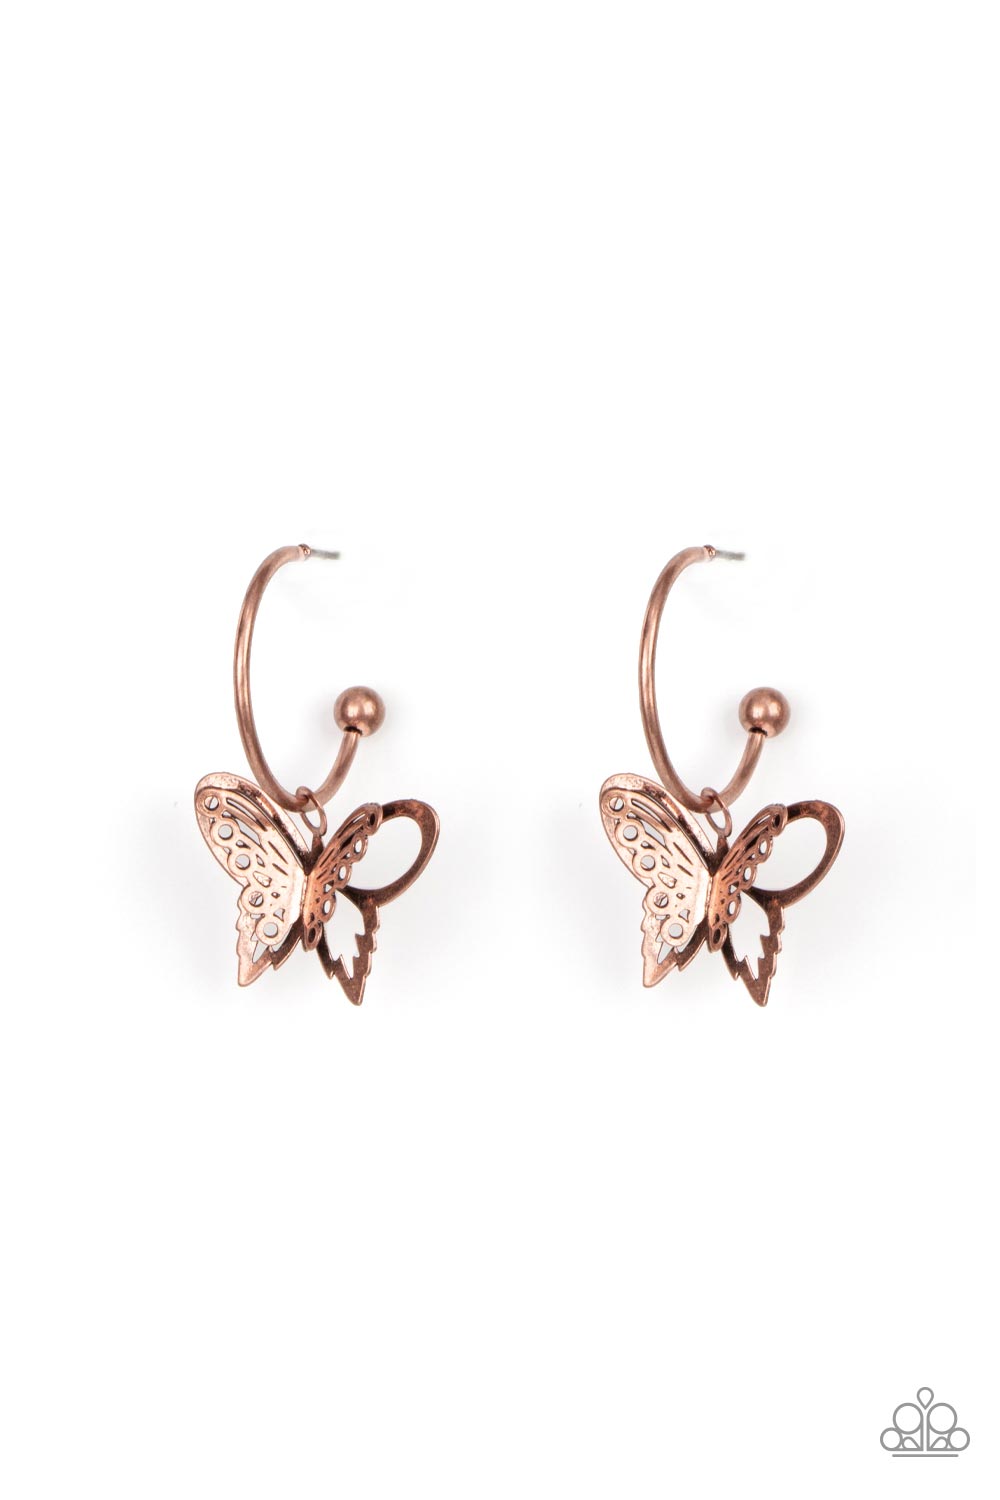 Butterfly Freestyle Copper Earring - Paparazzi Accessories  An airy copper butterfly charm glides along a dainty copper hoop, creating a fluttering fashion. Earring attaches to a post fitting. Hoop measures approximately 3/4" in diameter.  Sold as one pair of hoop earrings.